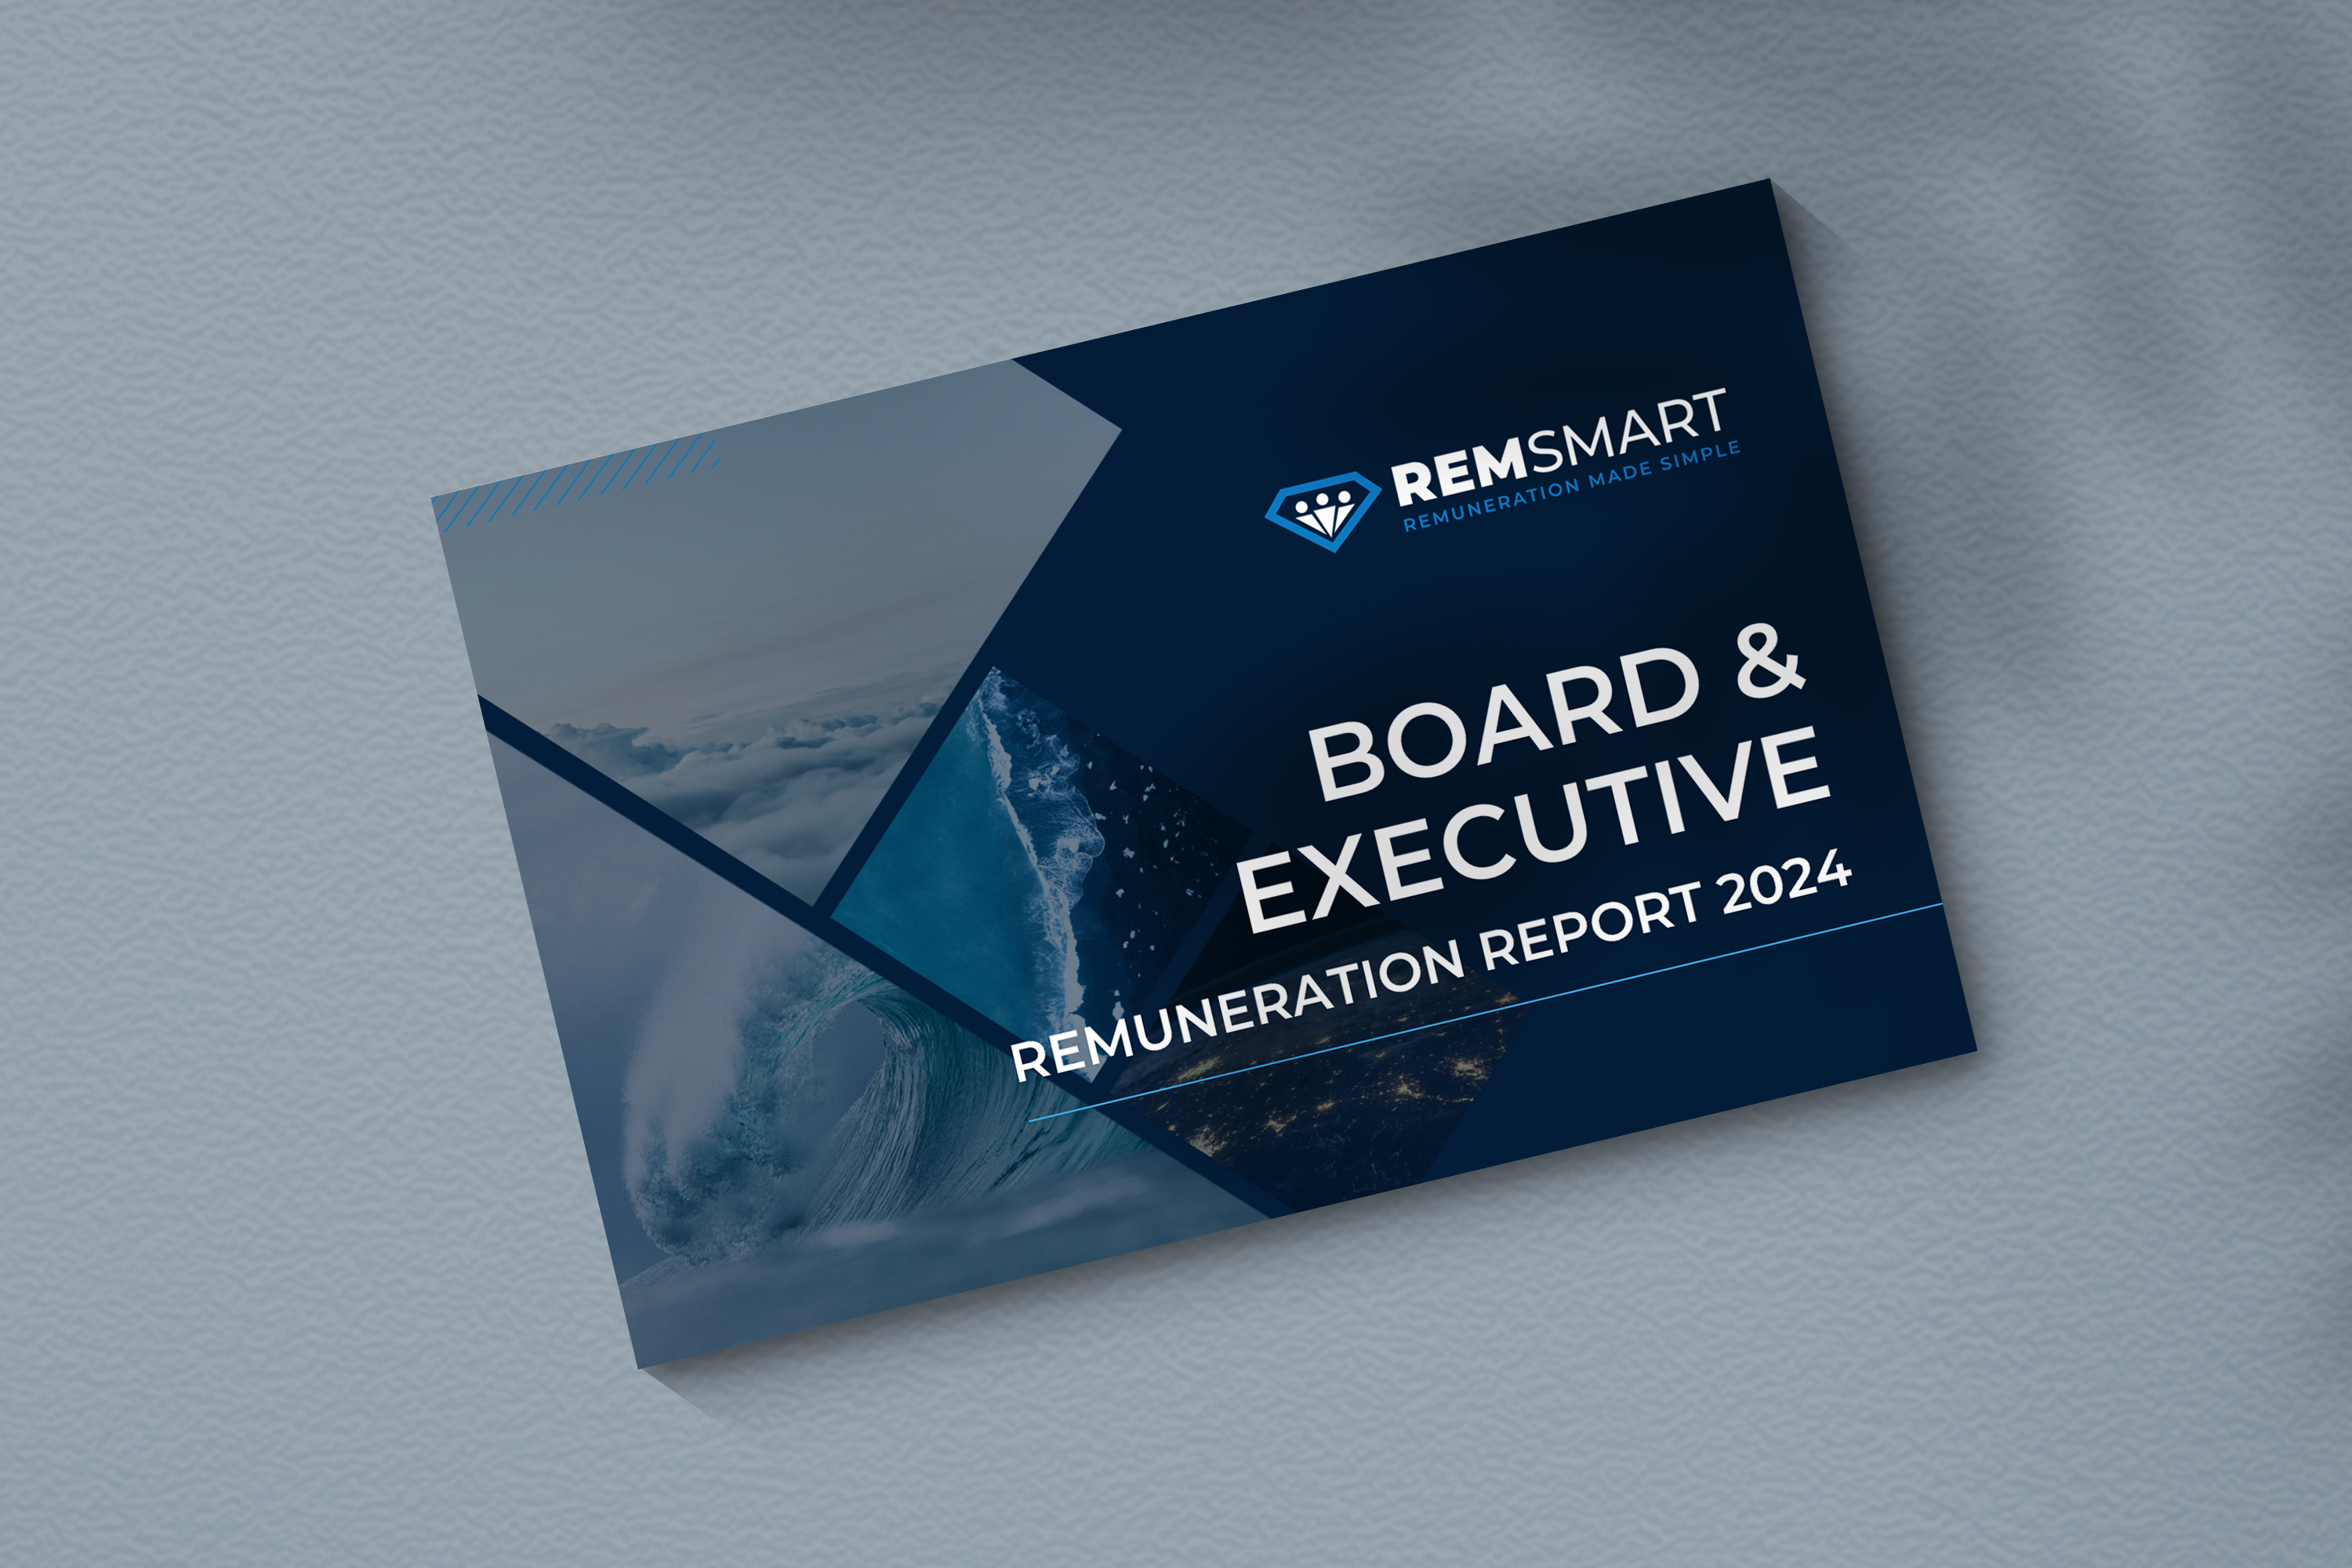 The REMSMART Board & Executive Remuneration Report 2024